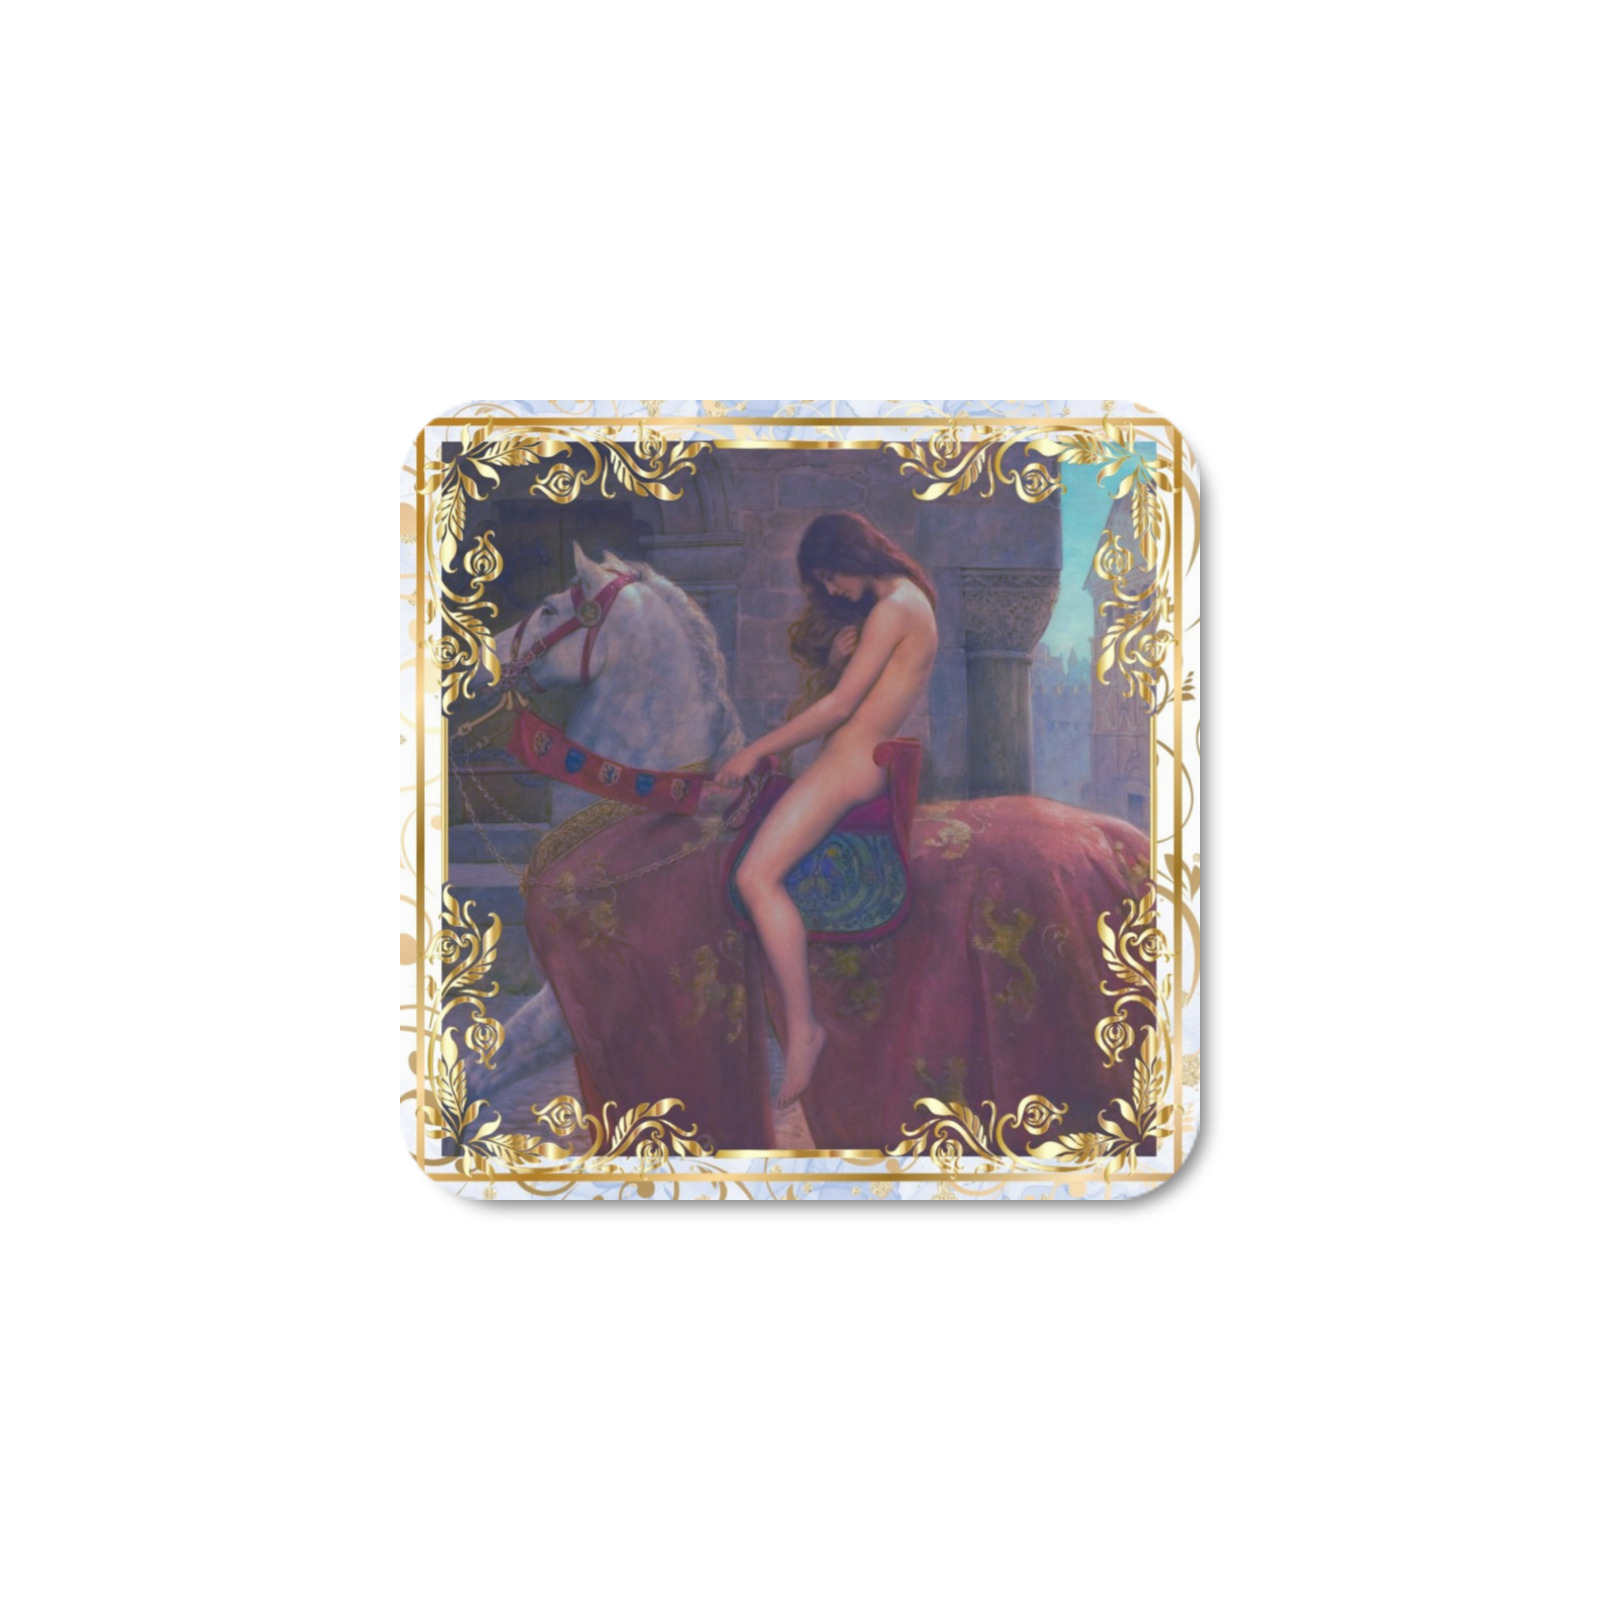 First Remastered Version of Lady Godiva by John Collier Square Fridge Magnet